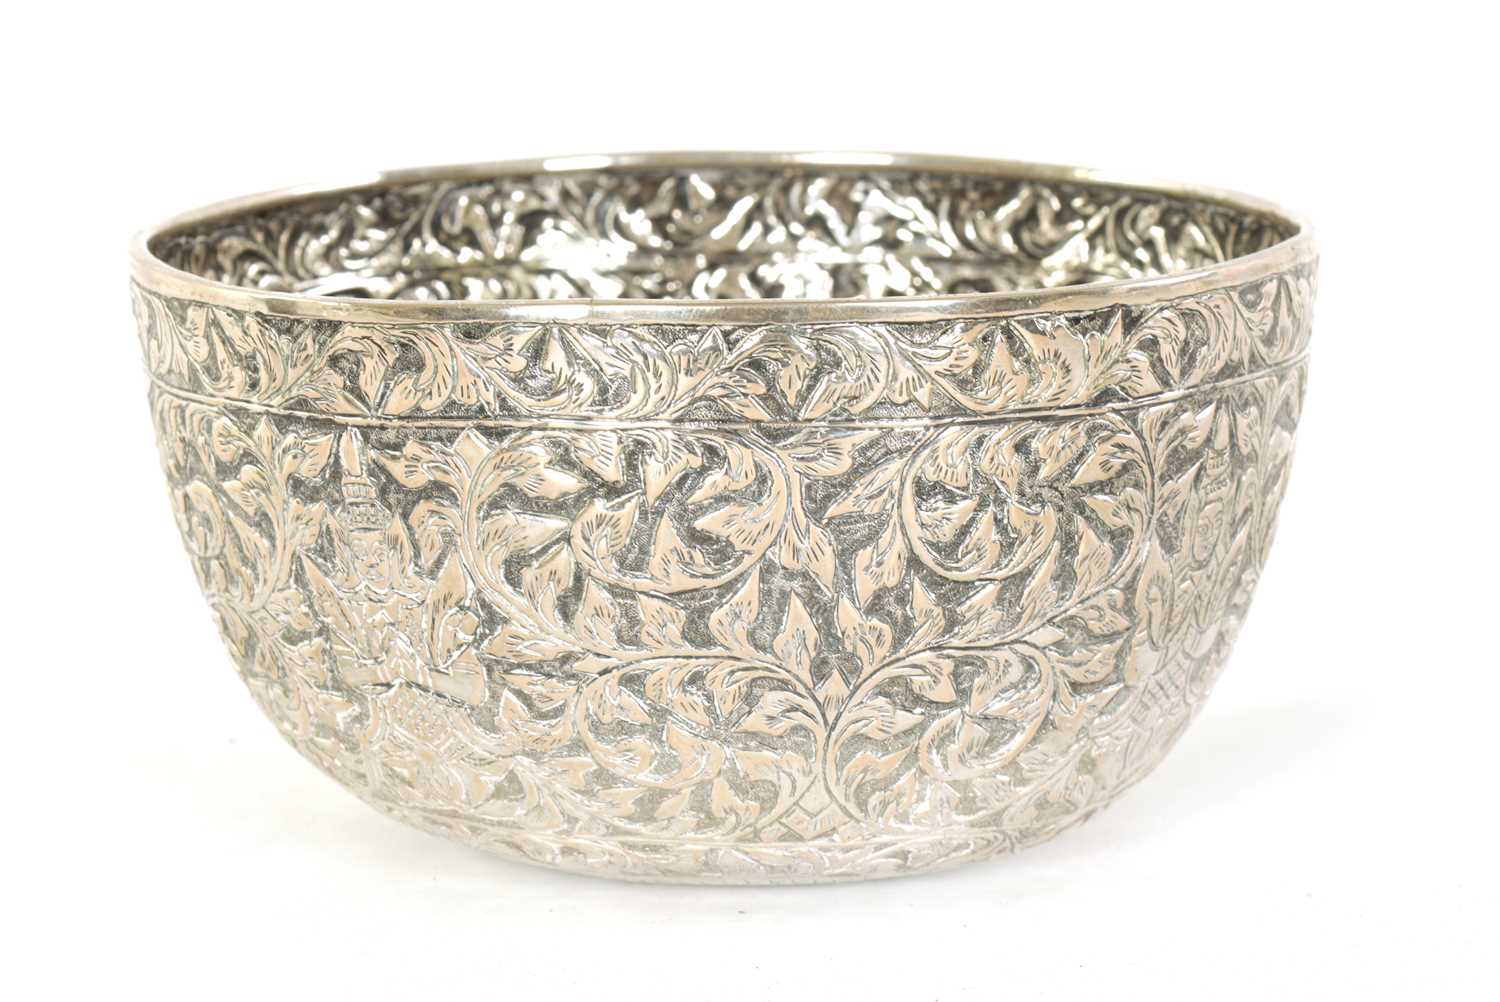 Lot 76 - A LATE 19TH CENTURY INDIAN SILVER BOWL